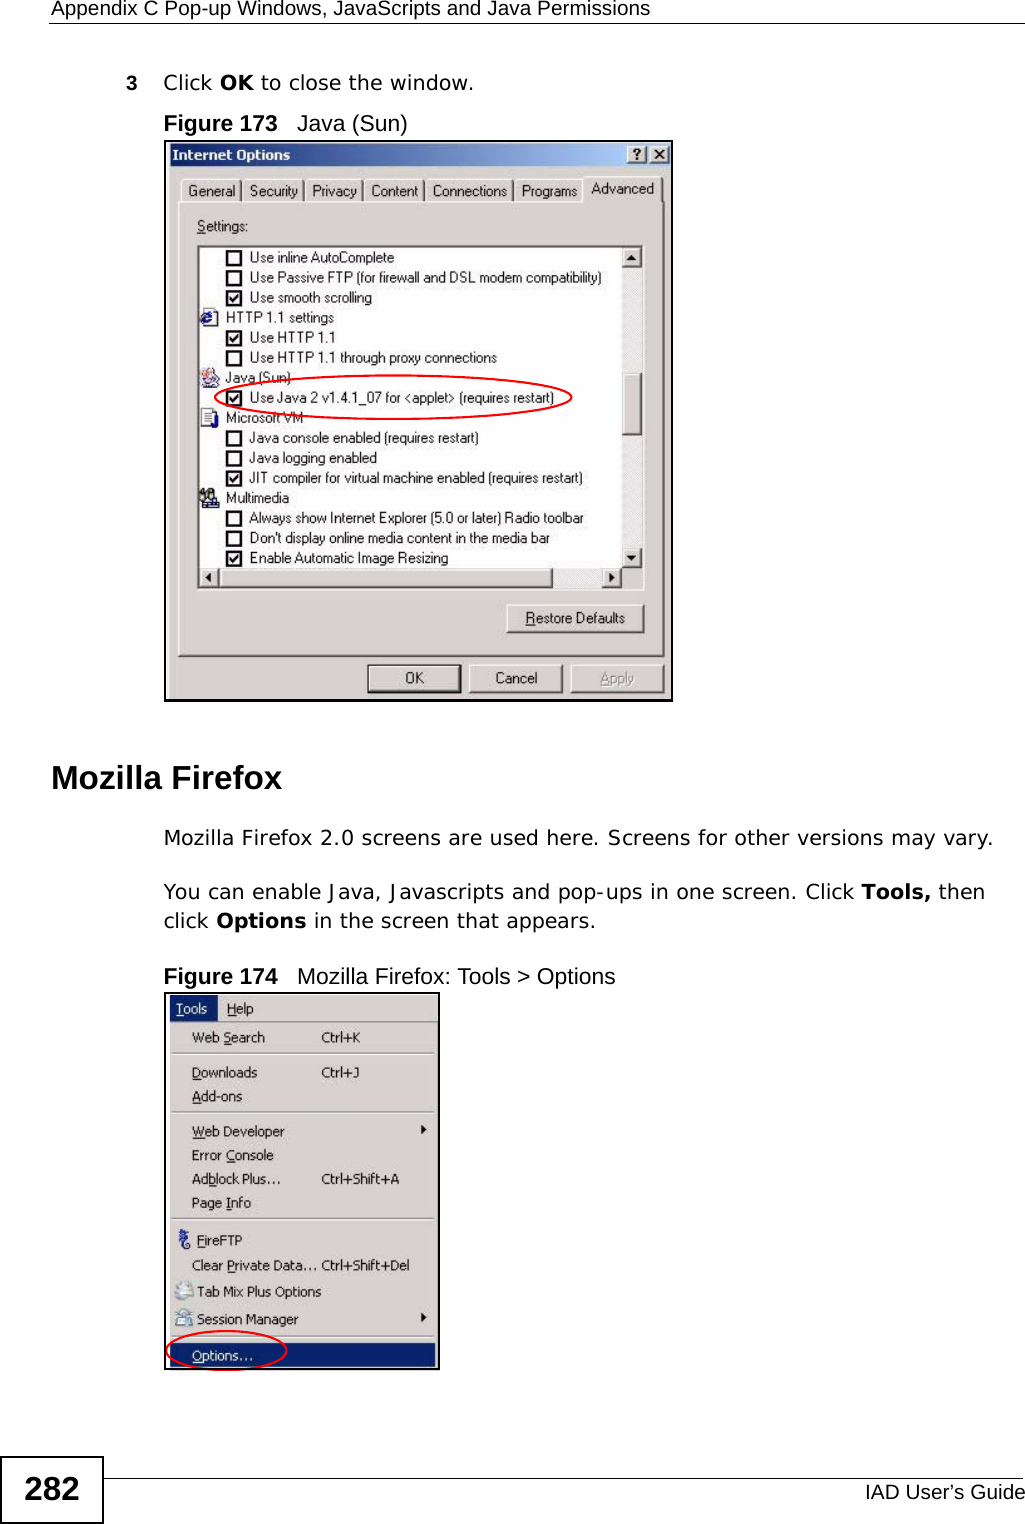 Appendix C Pop-up Windows, JavaScripts and Java PermissionsIAD User’s Guide2823Click OK to close the window.Figure 173   Java (Sun)Mozilla FirefoxMozilla Firefox 2.0 screens are used here. Screens for other versions may vary. You can enable Java, Javascripts and pop-ups in one screen. Click Tools, then click Options in the screen that appears.Figure 174   Mozilla Firefox: Tools &gt; Options